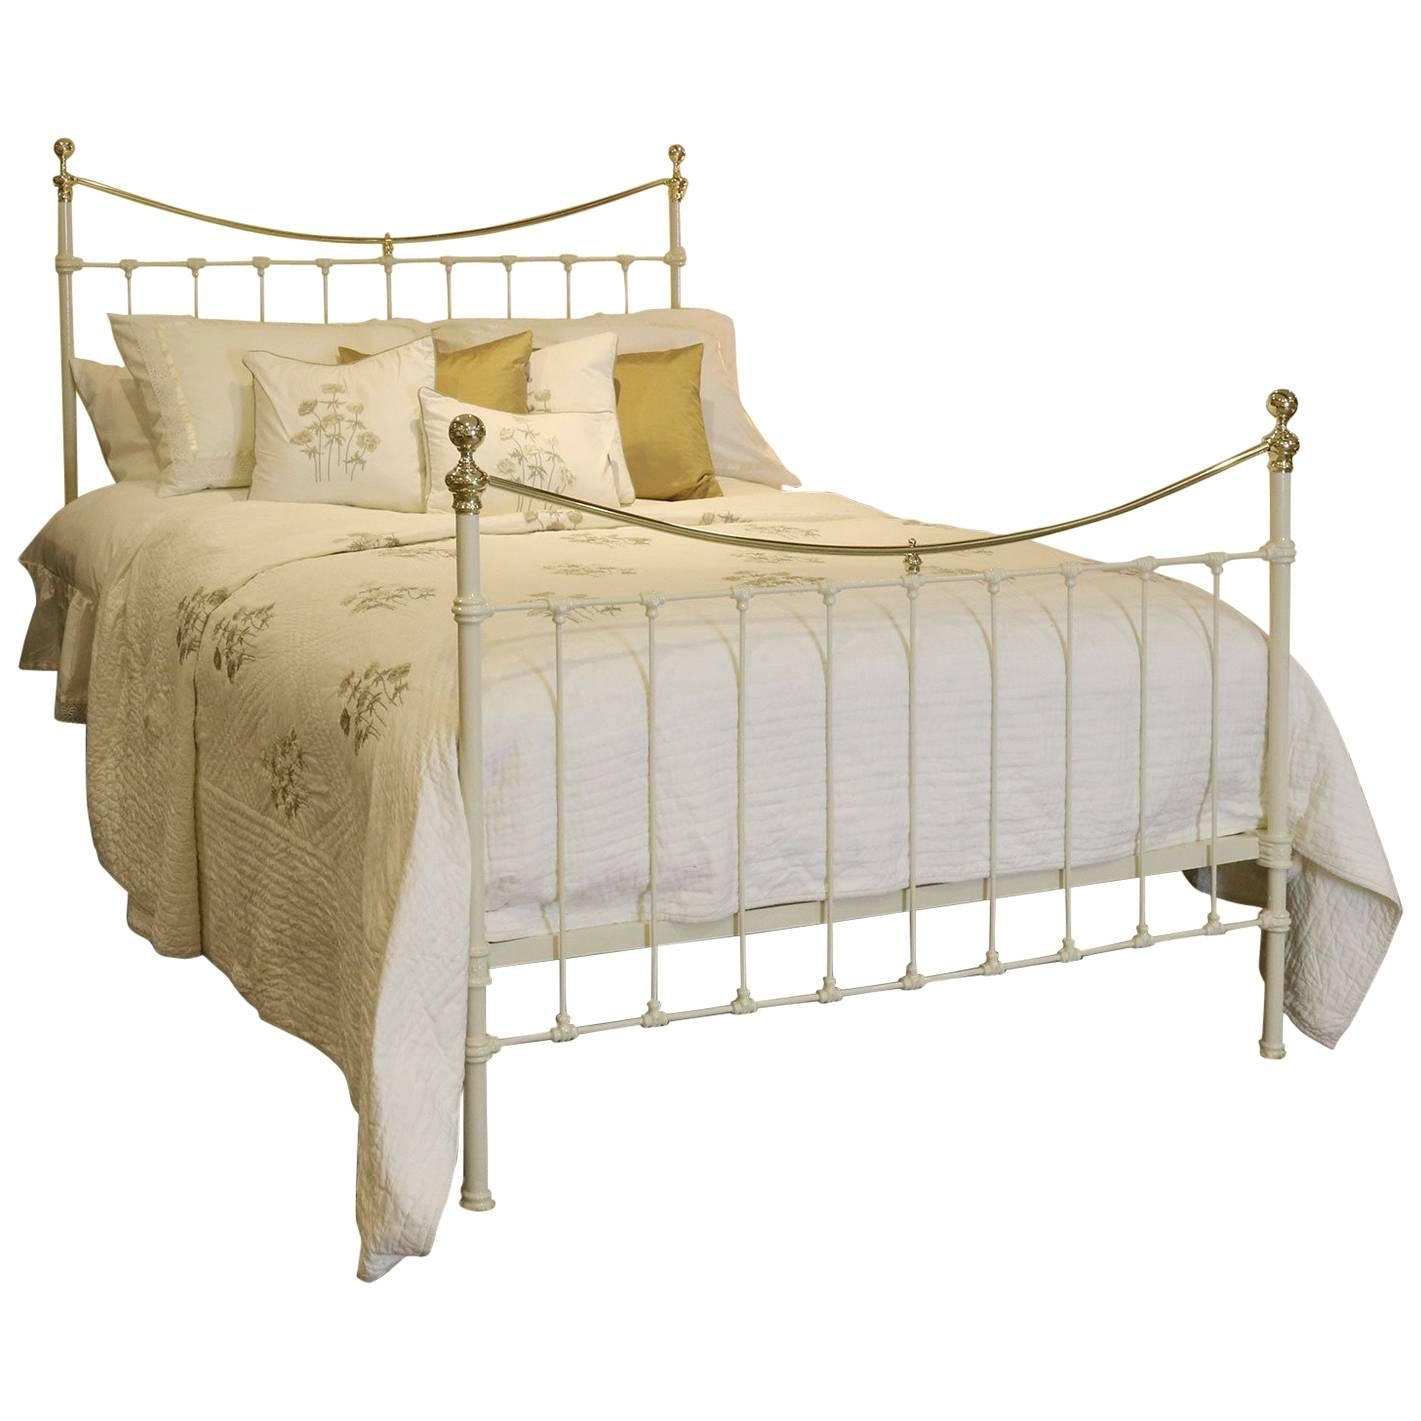 Brass and Iron Bed in Cream, MK94